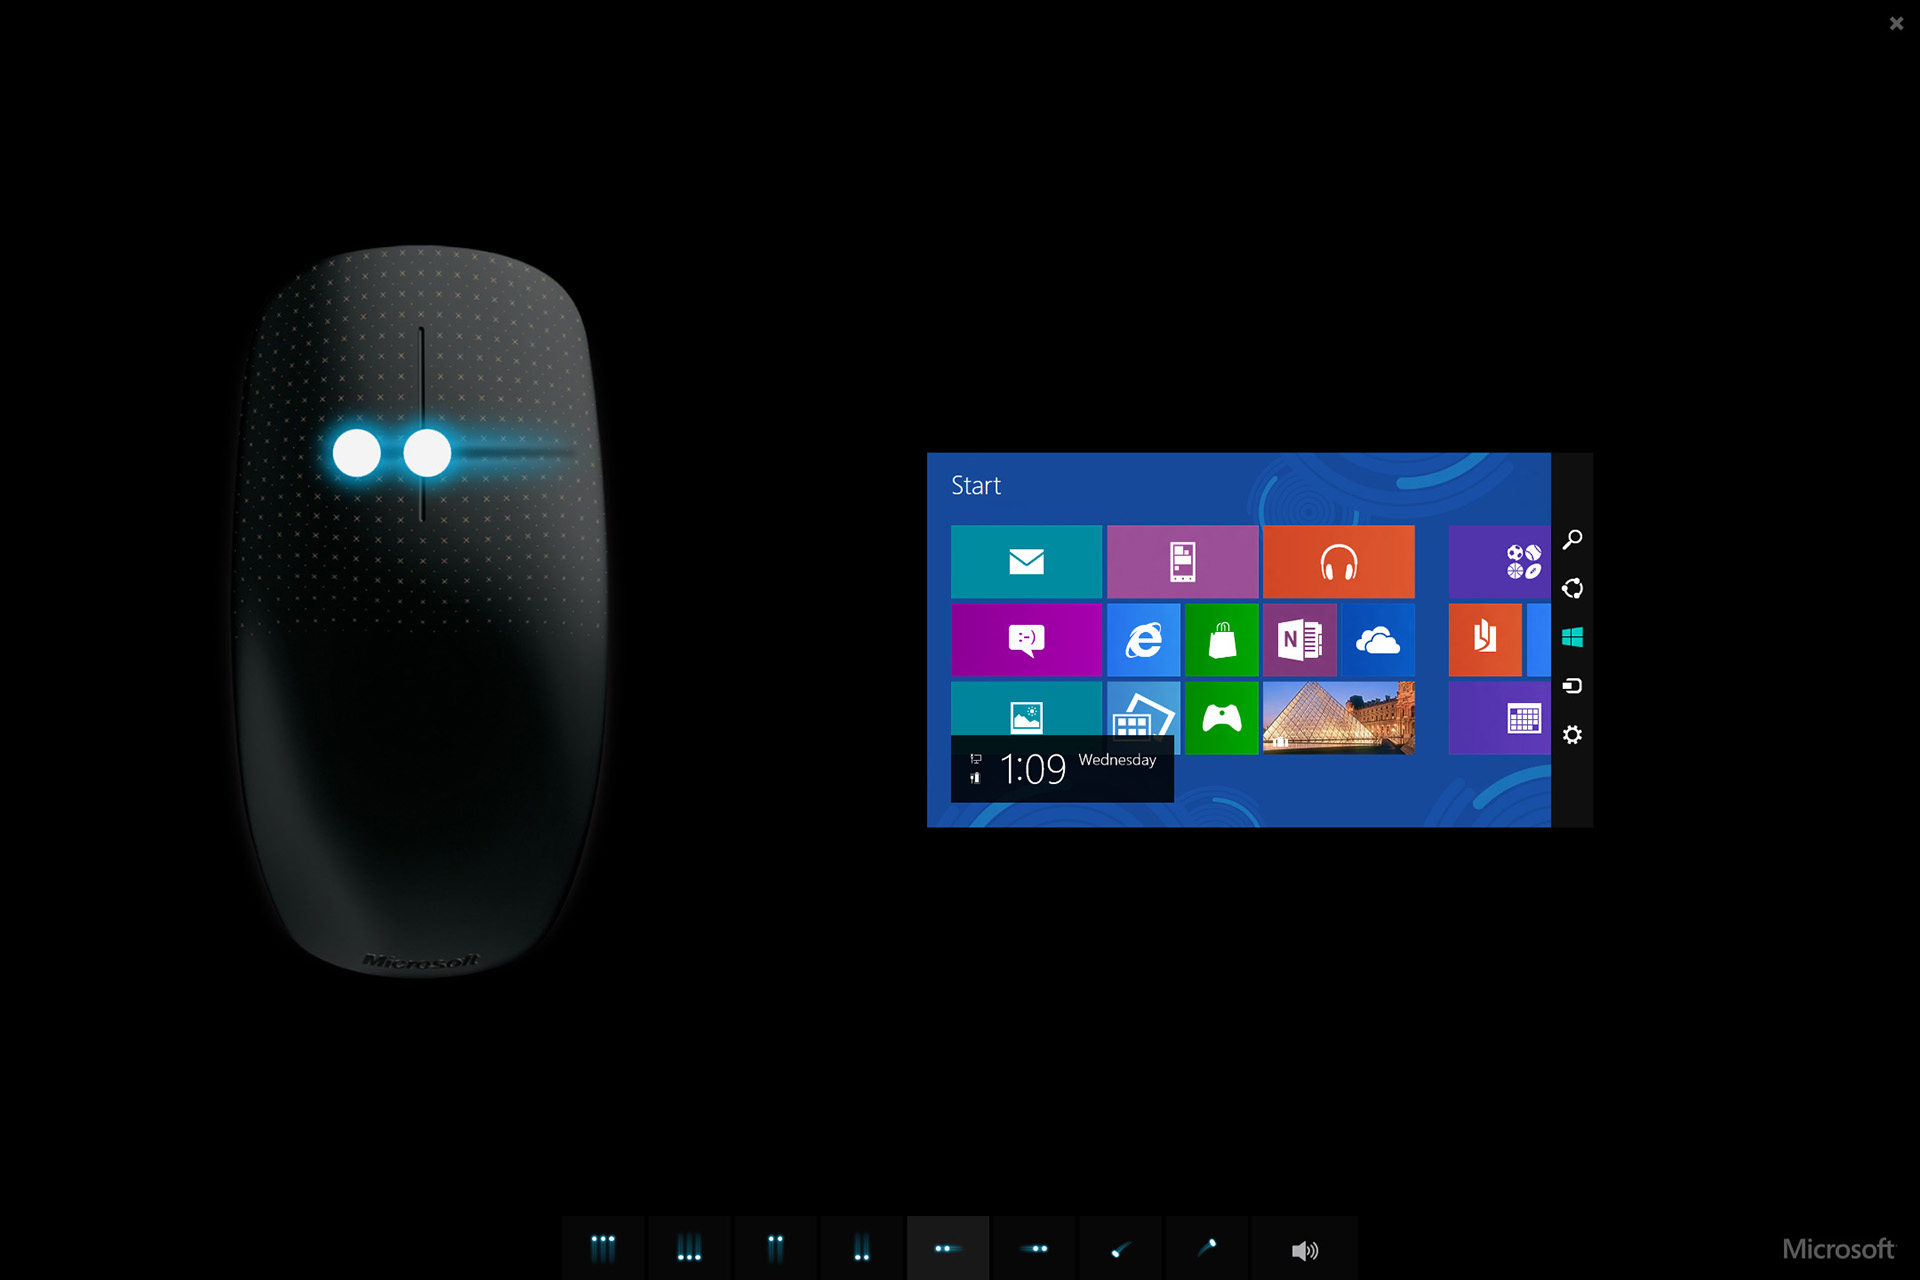 Microsoft Touch Mouse - Gesture tutorial application